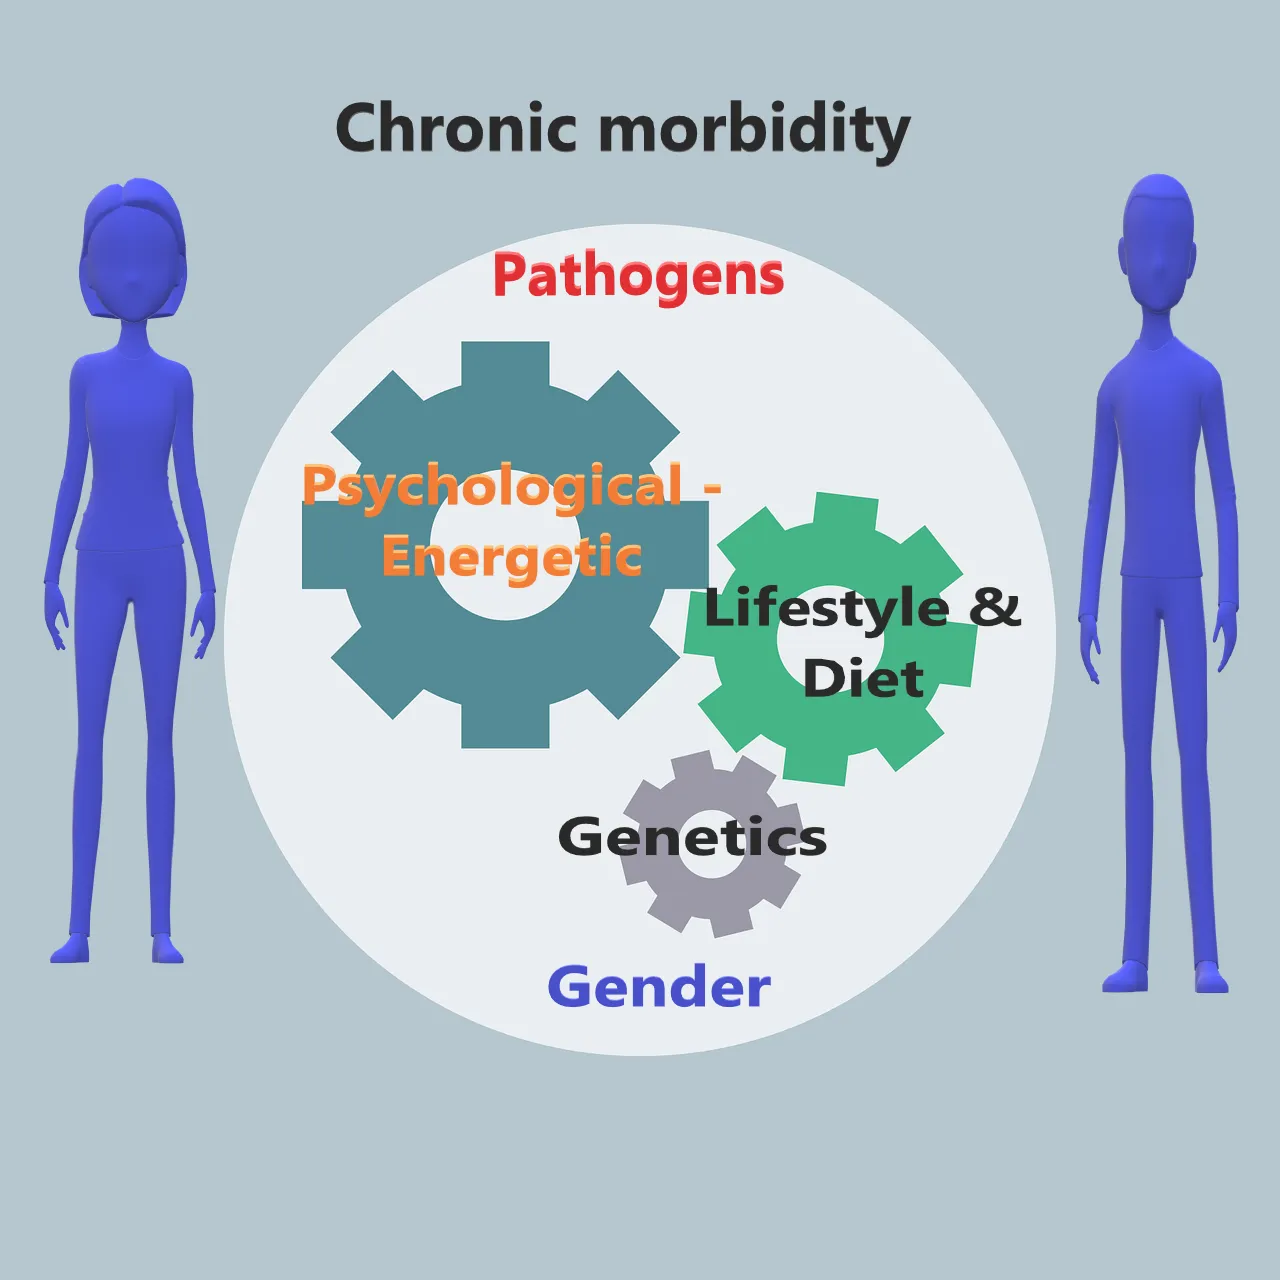 The leading causes & catalysts of chronic morbidity.